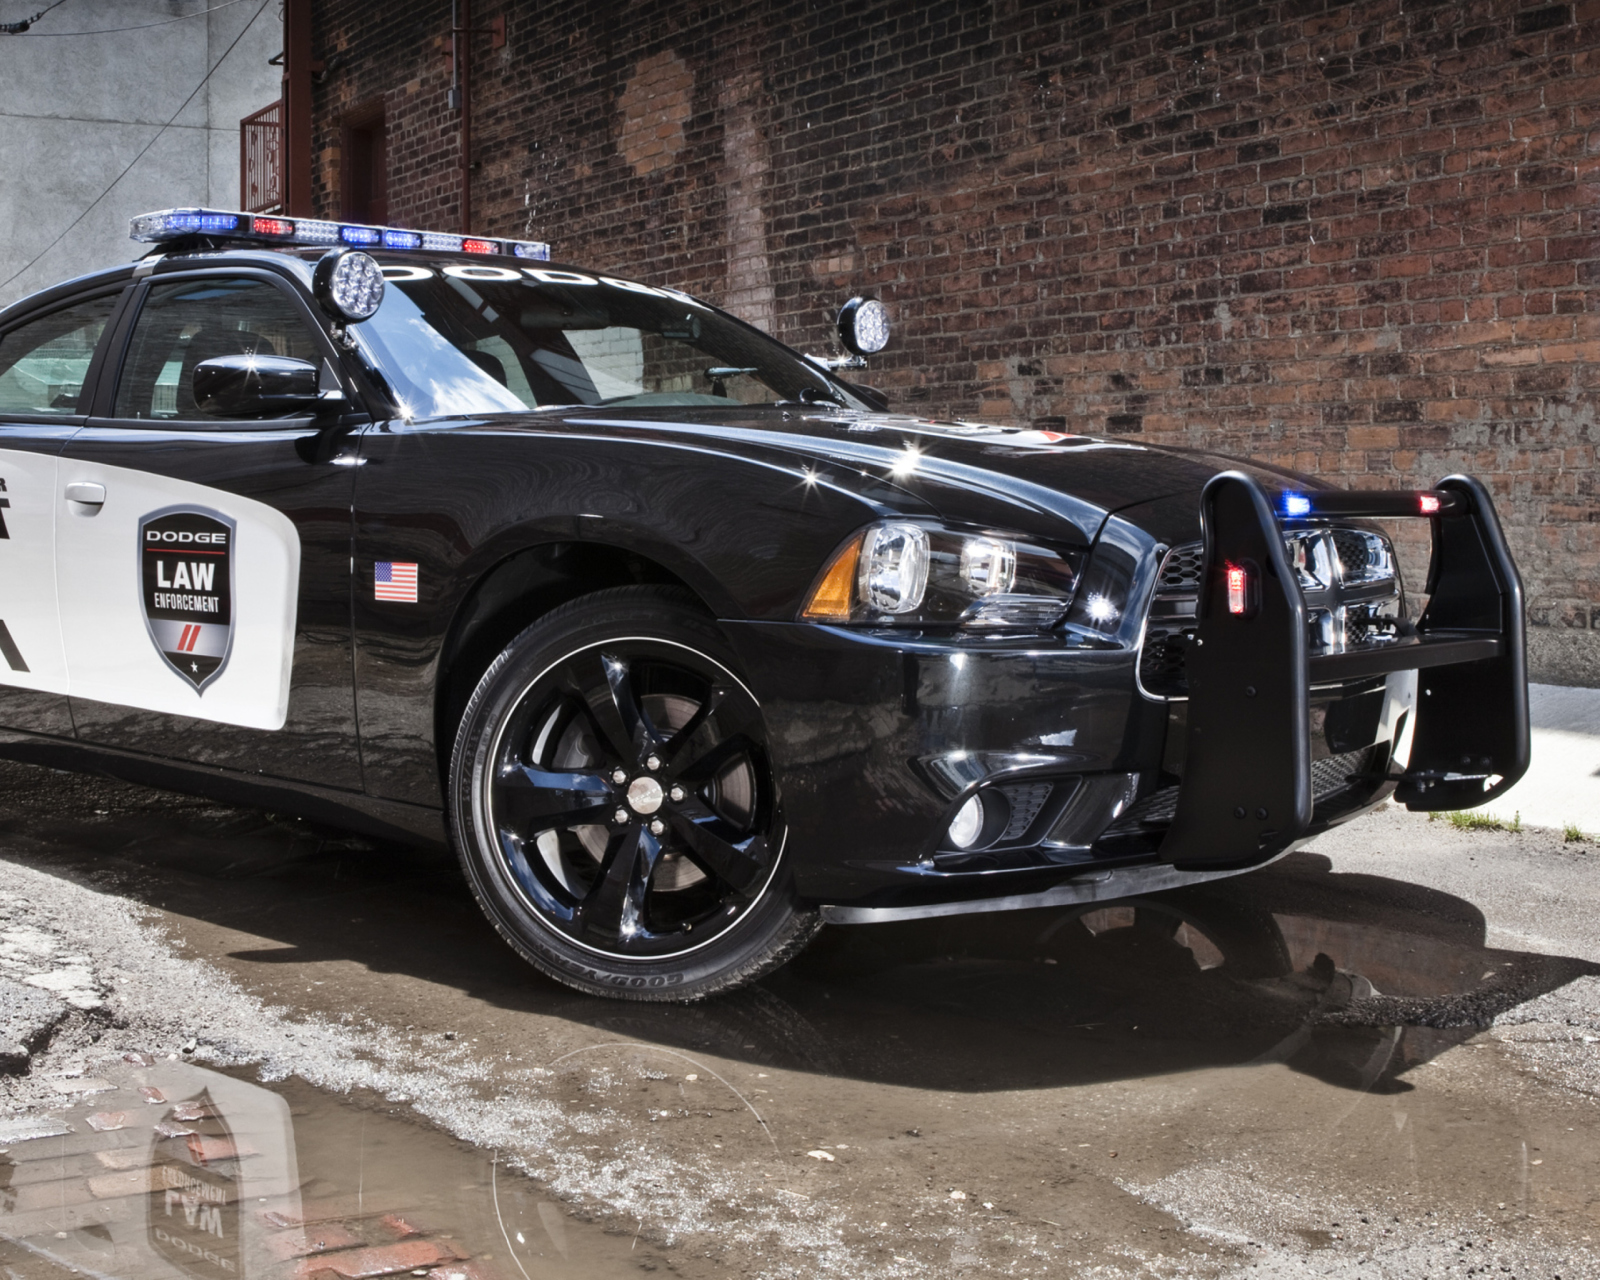 Dodge Charger - Police Car wallpaper 1600x1280